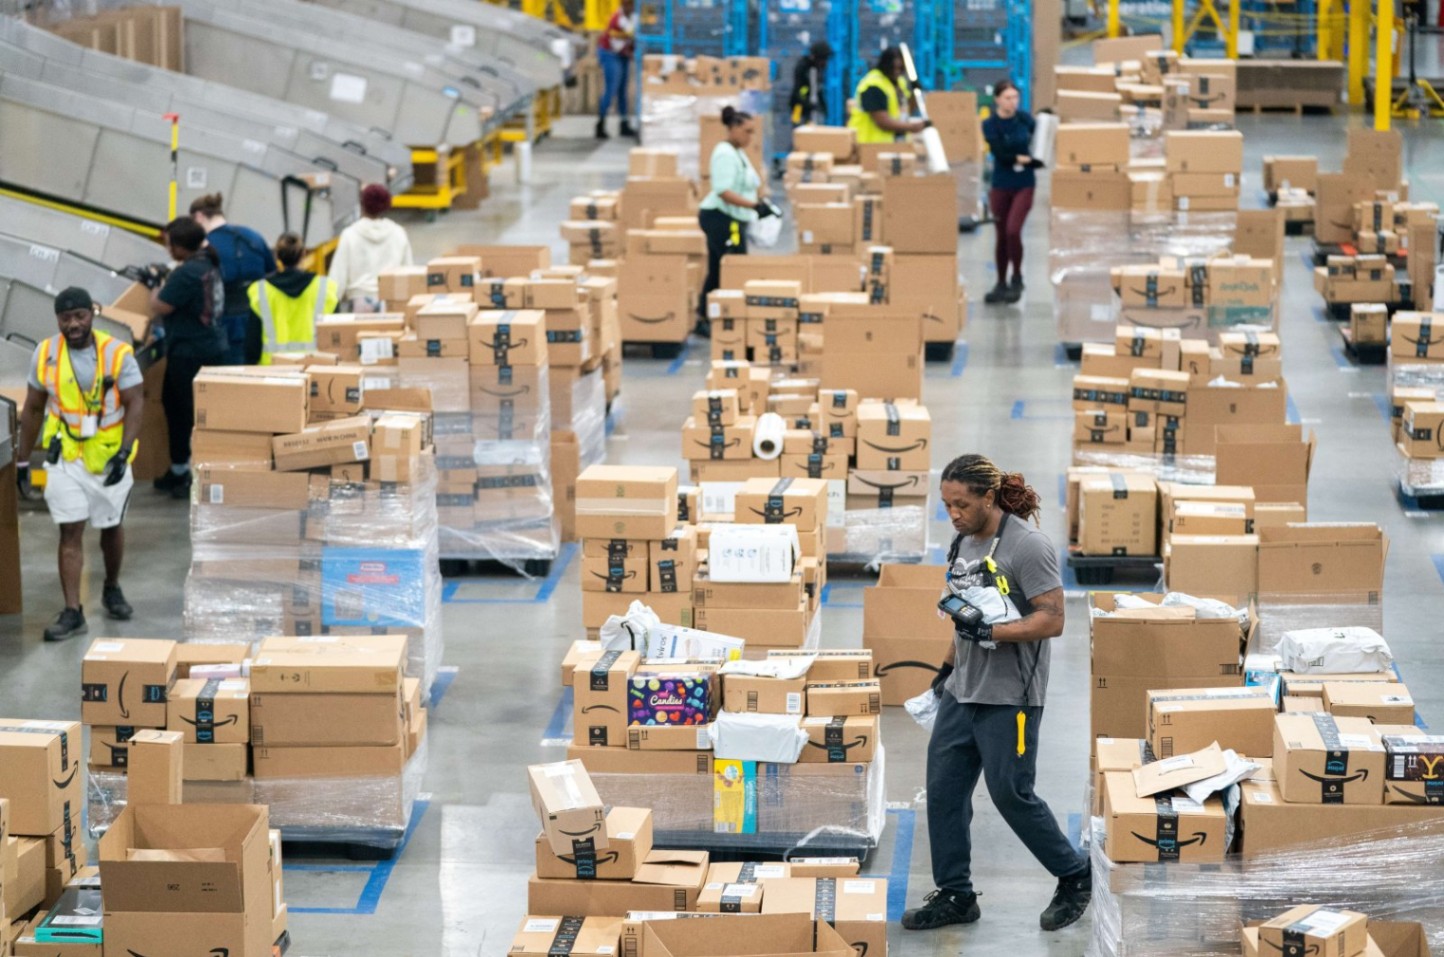 Exploring Amazon Opportunities: How to Apply for Jobs